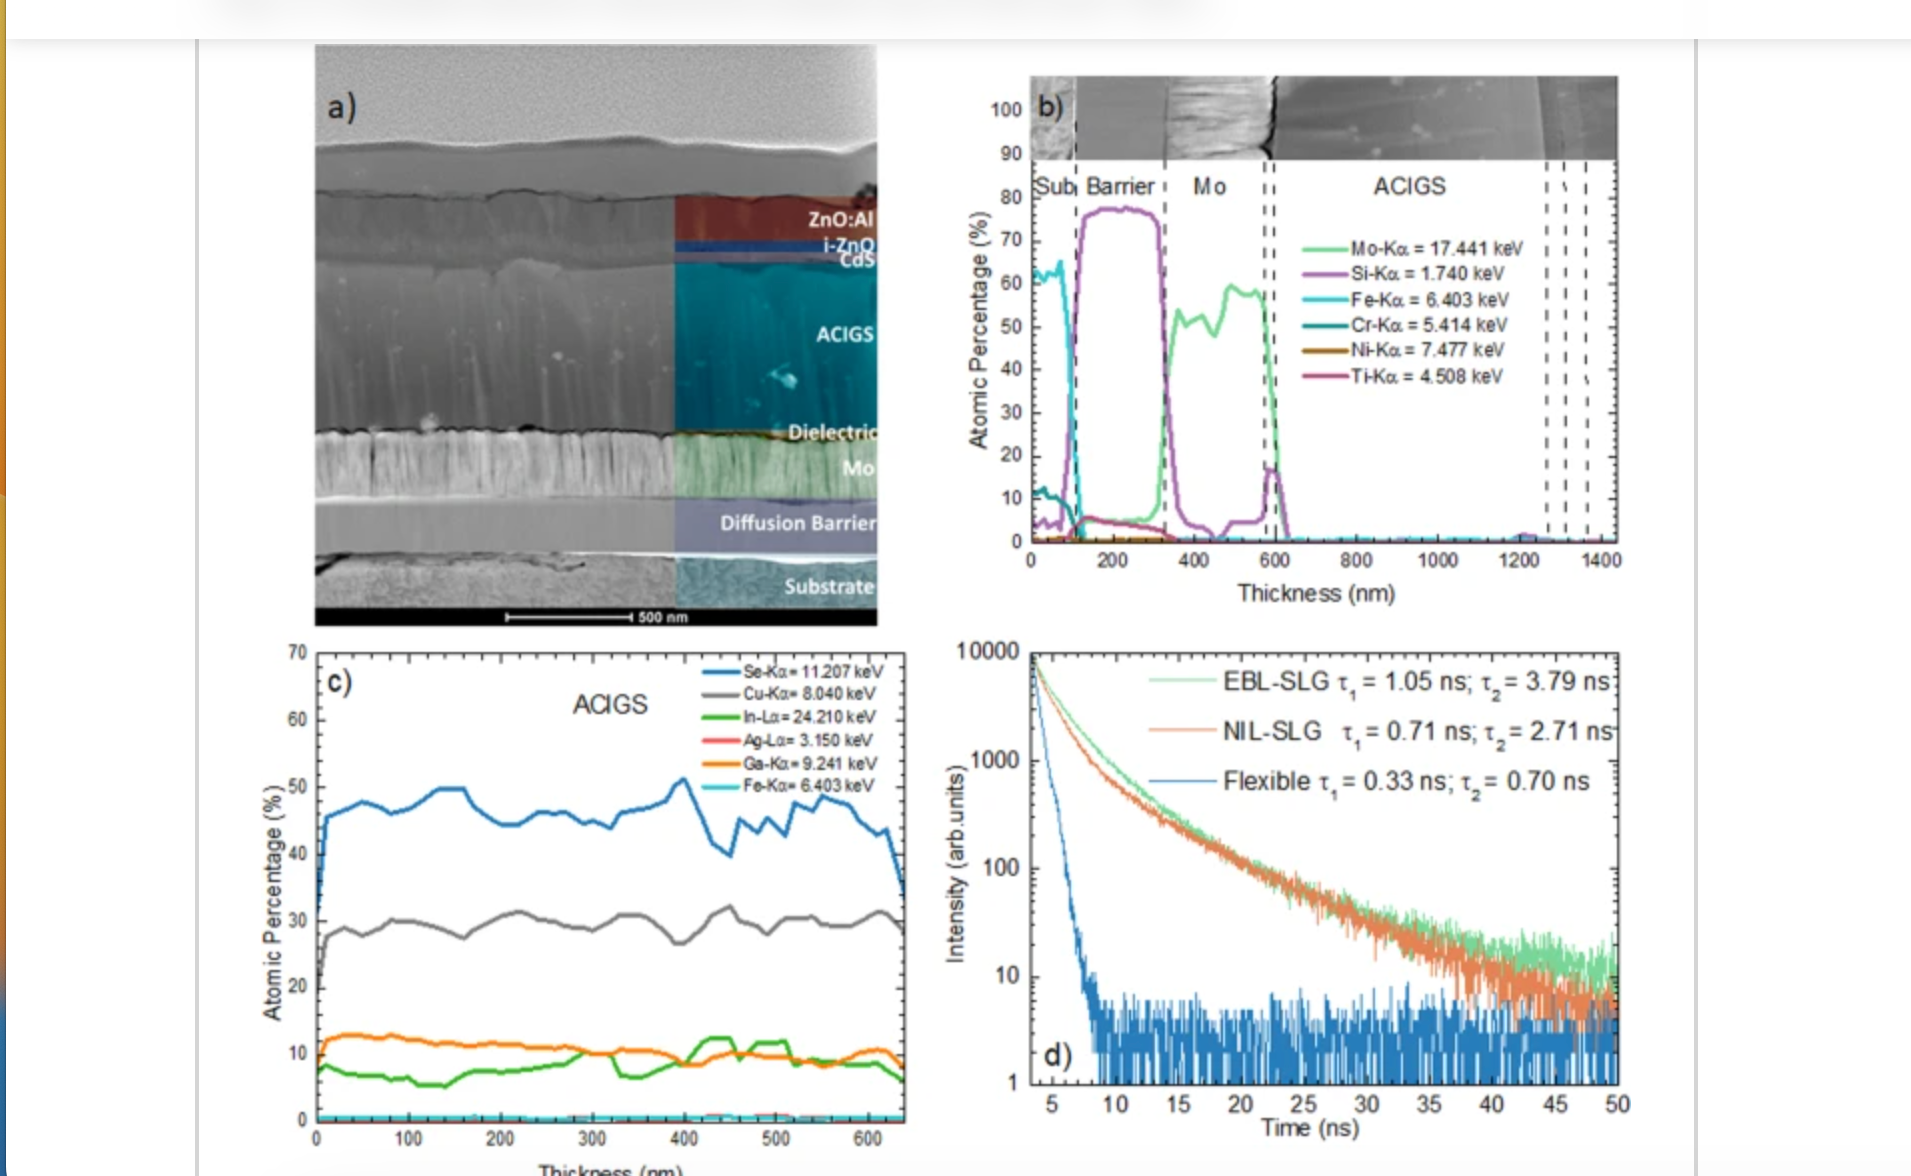 New publication: Cu(In,Ga)Se2 based ultrathin solar cells the pathway from lab rigid to large scale flexible technology